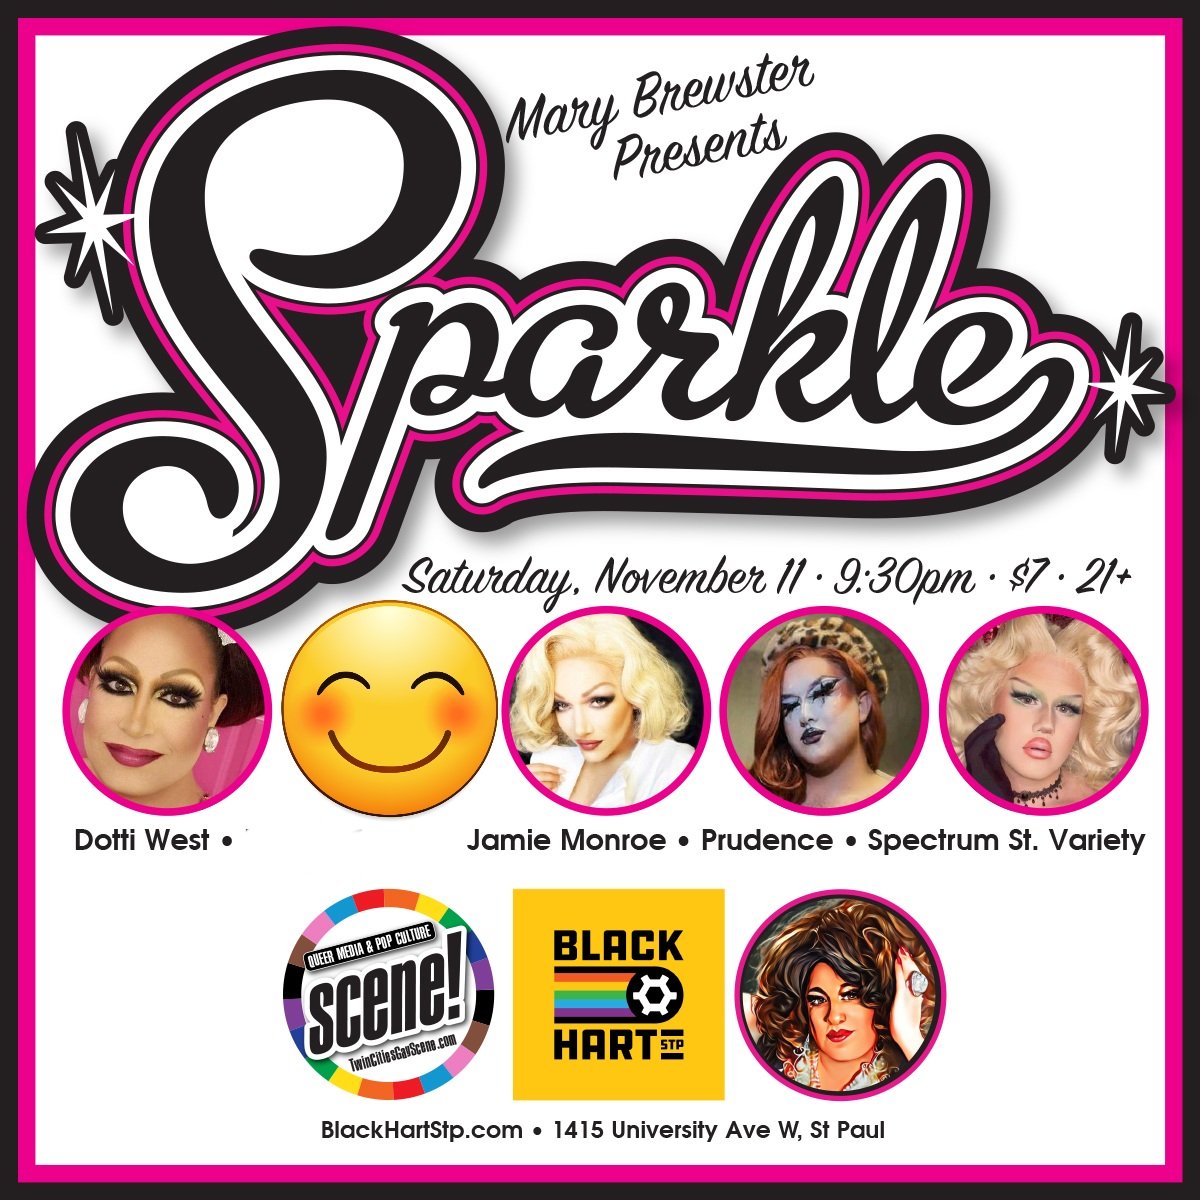 Saturday night, we SPARKLE at @BlackHartSTP ! Join us at 9:30pm!